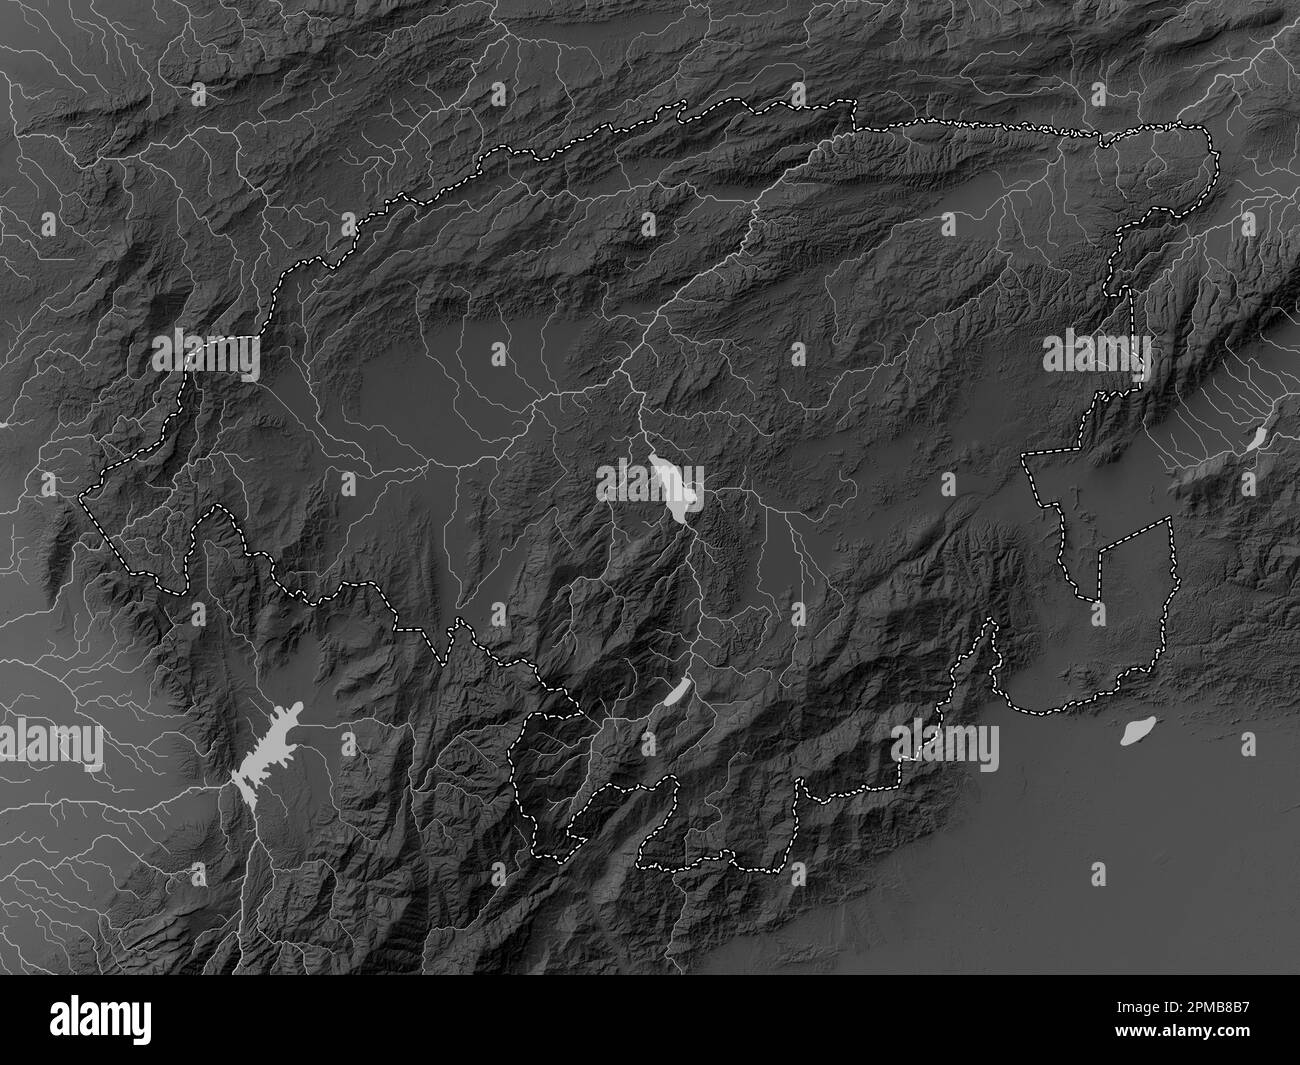 Lara, state of Venezuela. Grayscale elevation map with lakes and rivers Stock Photo